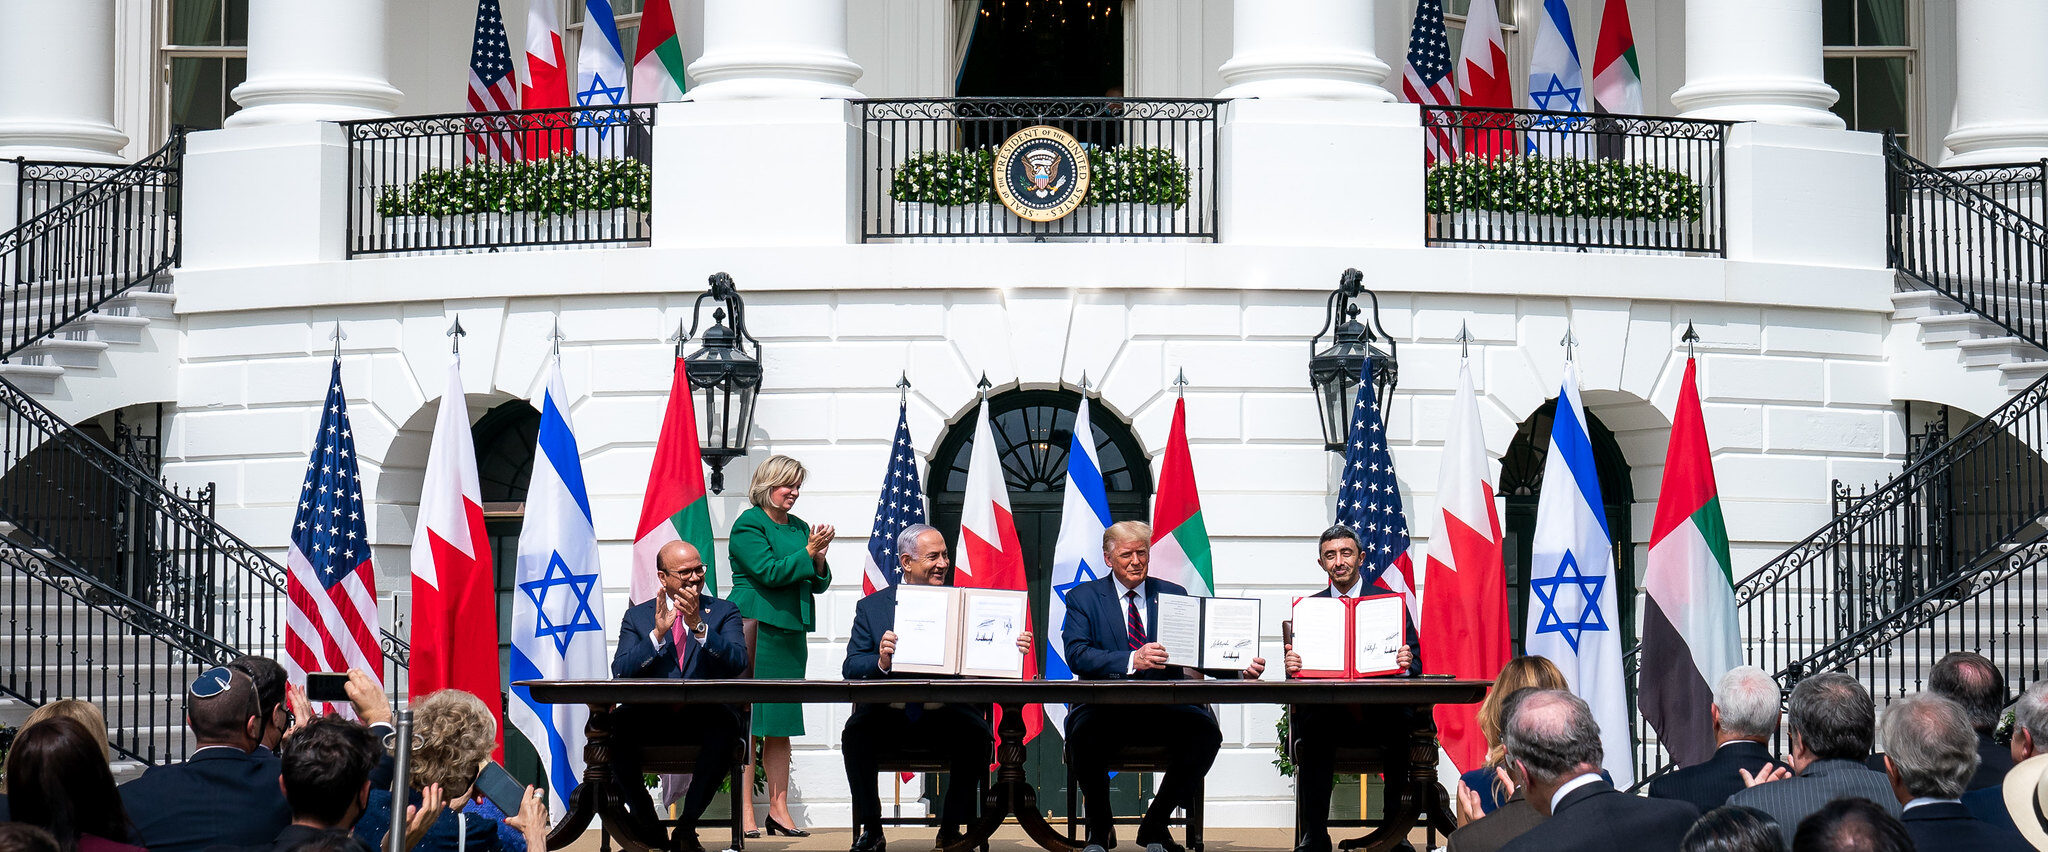 The signing ceremony of the Abraham Accords